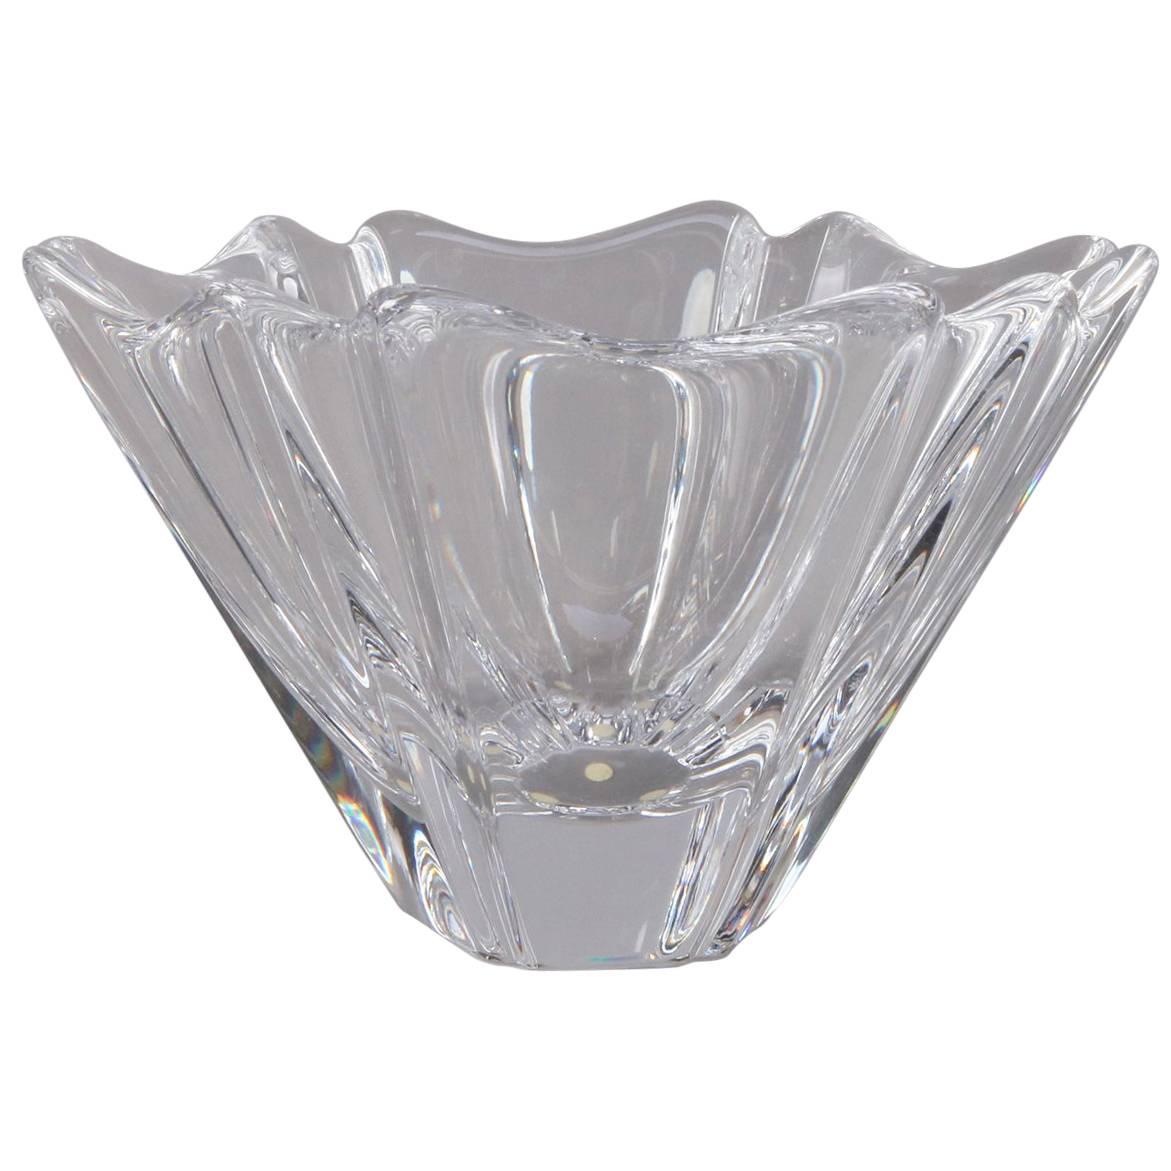 Swedish Crystal Orion Bowl by Lars Hellsten for Orrefors, 20th Century